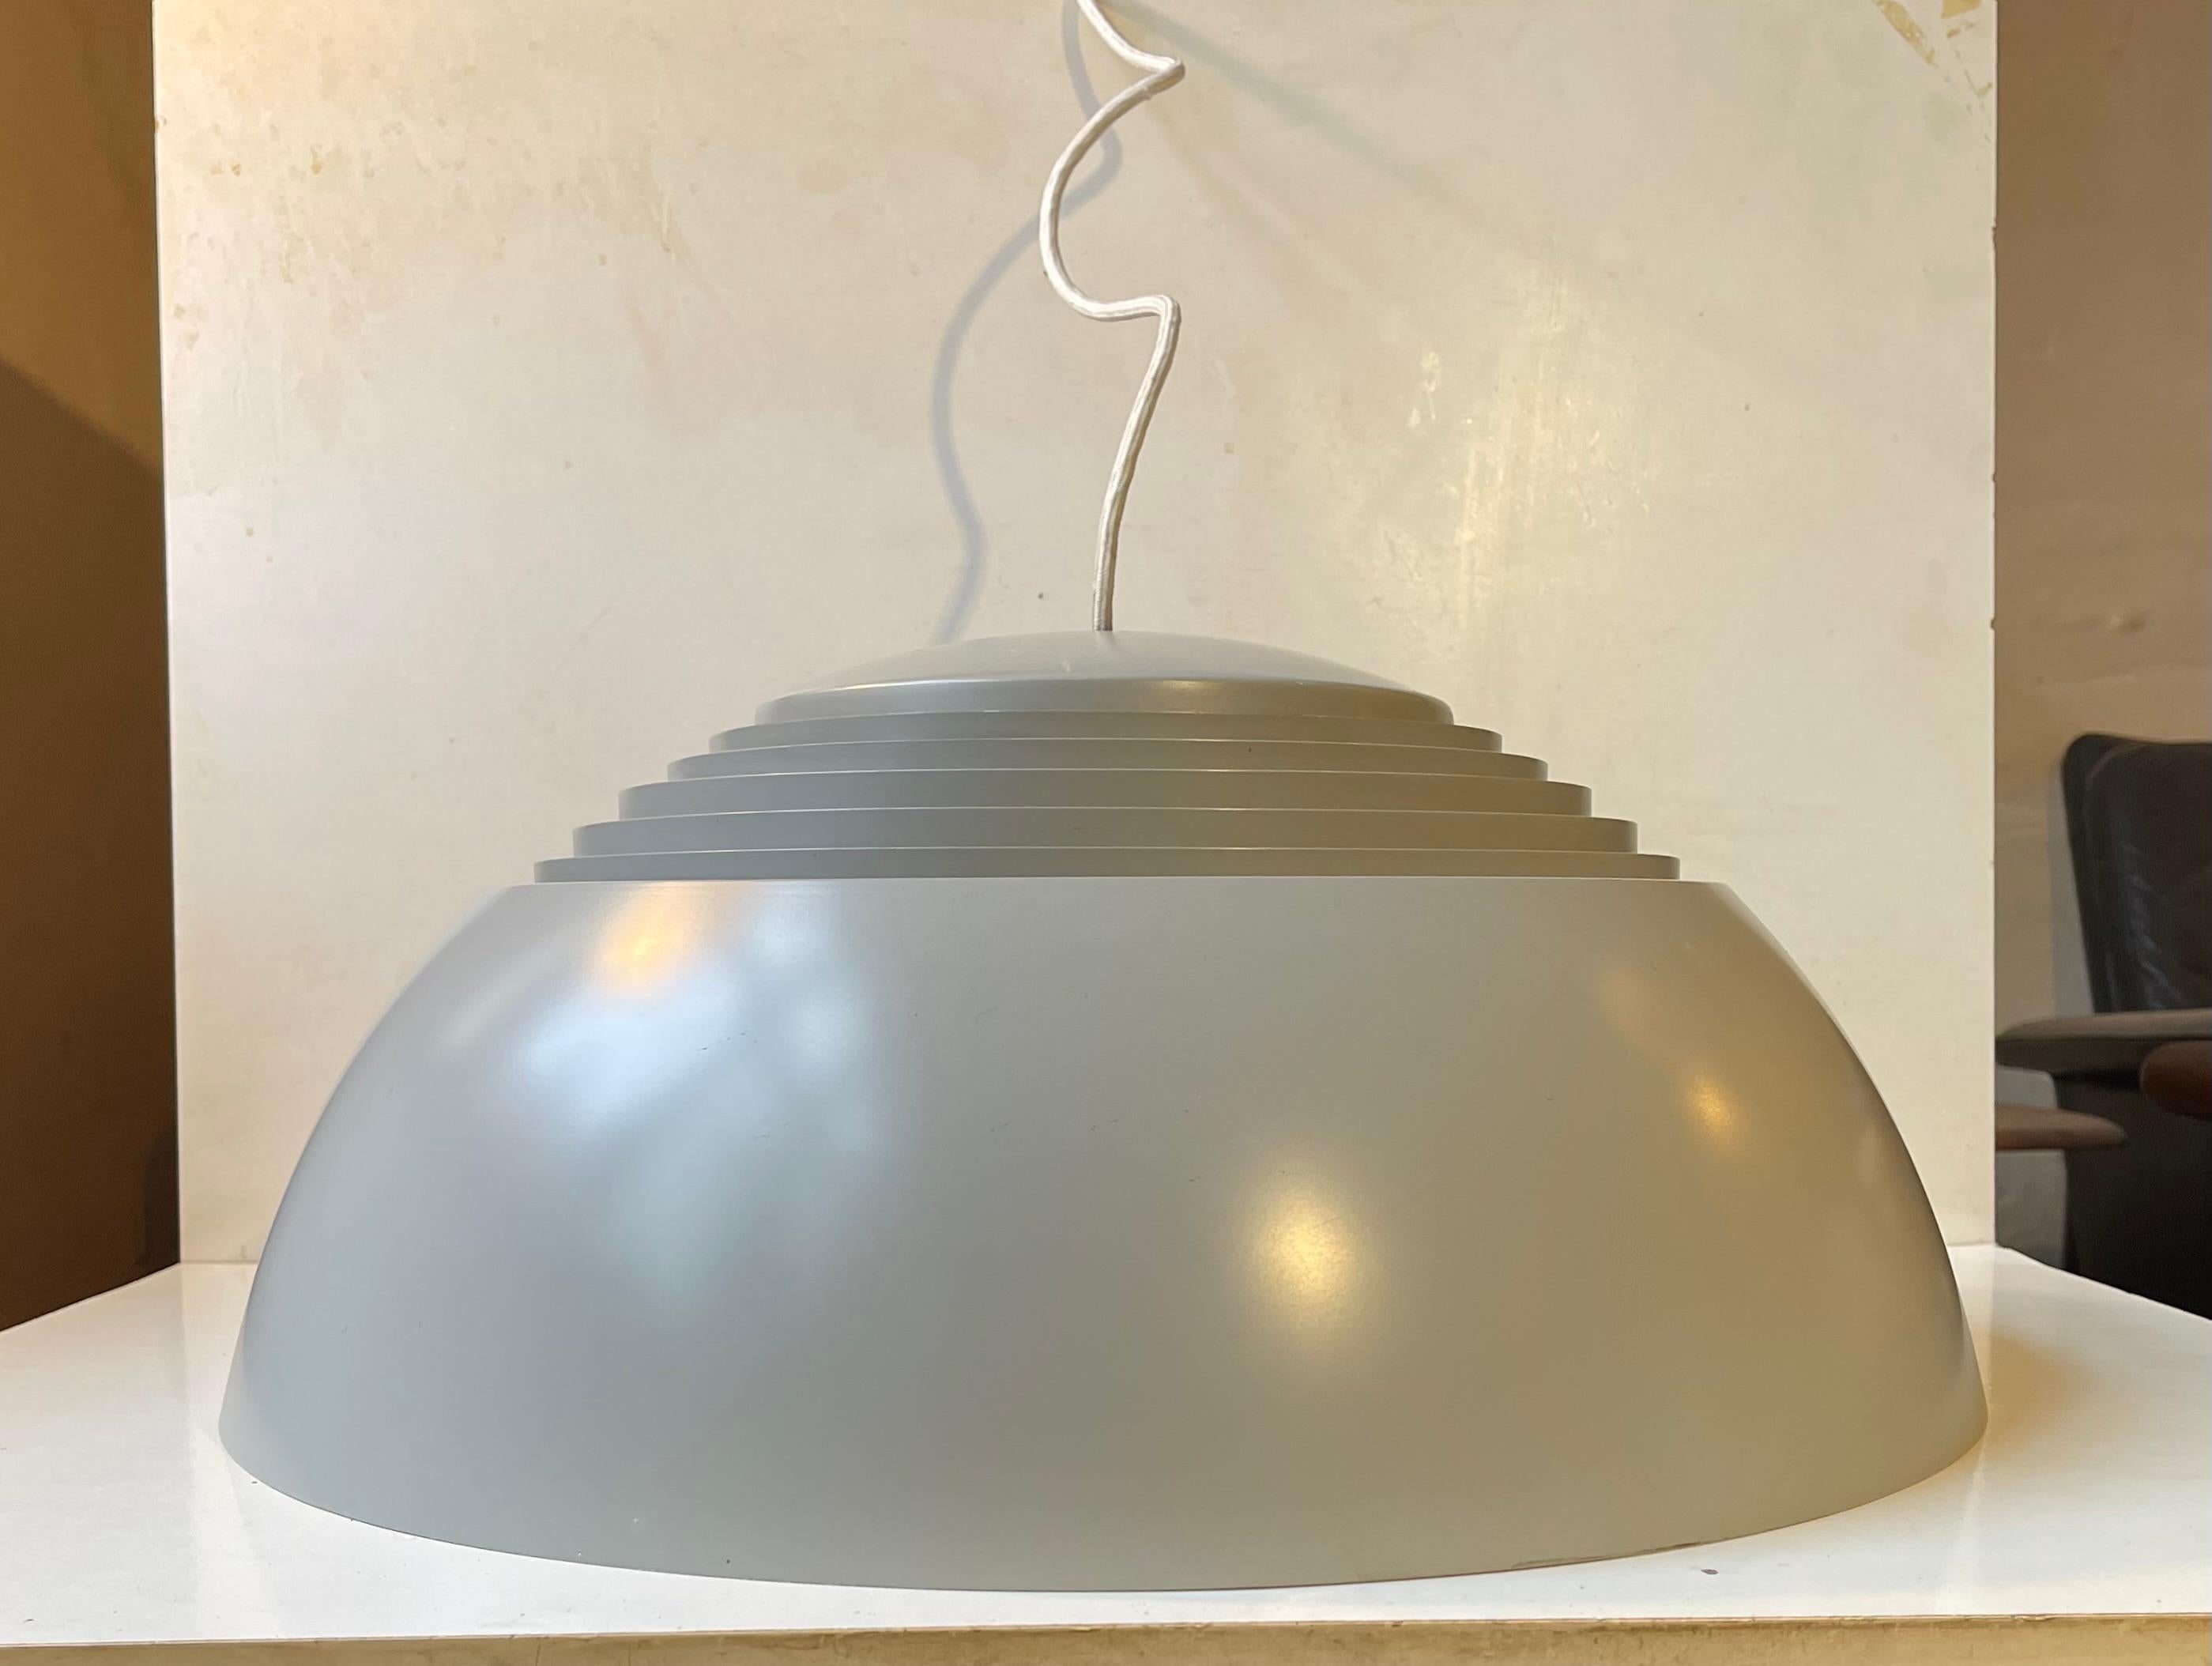 A large version of the AJ SAS Royal Pendant light (50cm). Design number 16554 designed by Arne Jacobsen in 1957 for Royal Blue SAS Hotel in Copenhagen. This particular example in its original elephant grey lacquer and still retaining its original 4